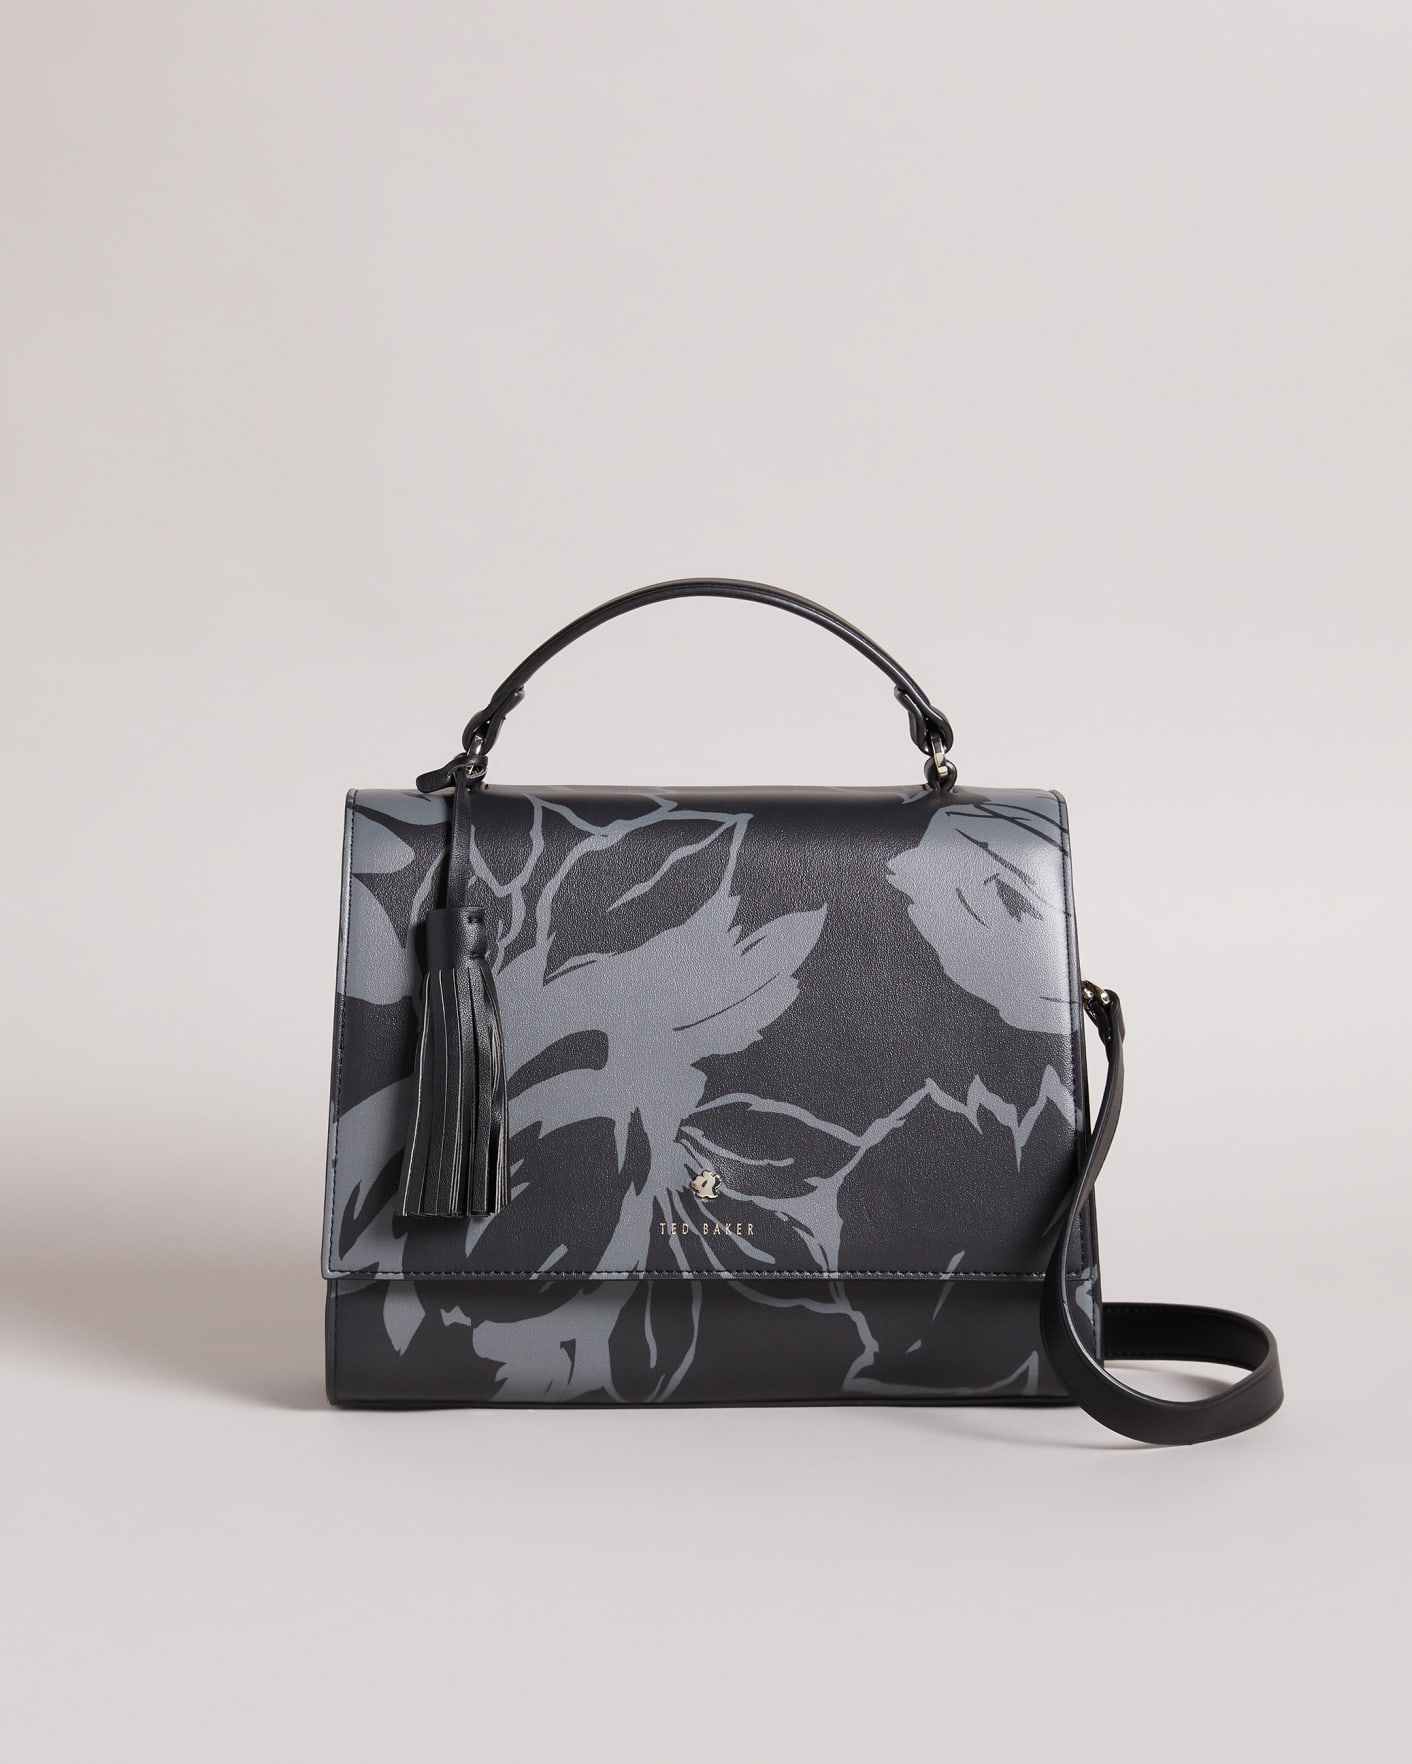 floral ted baker bags